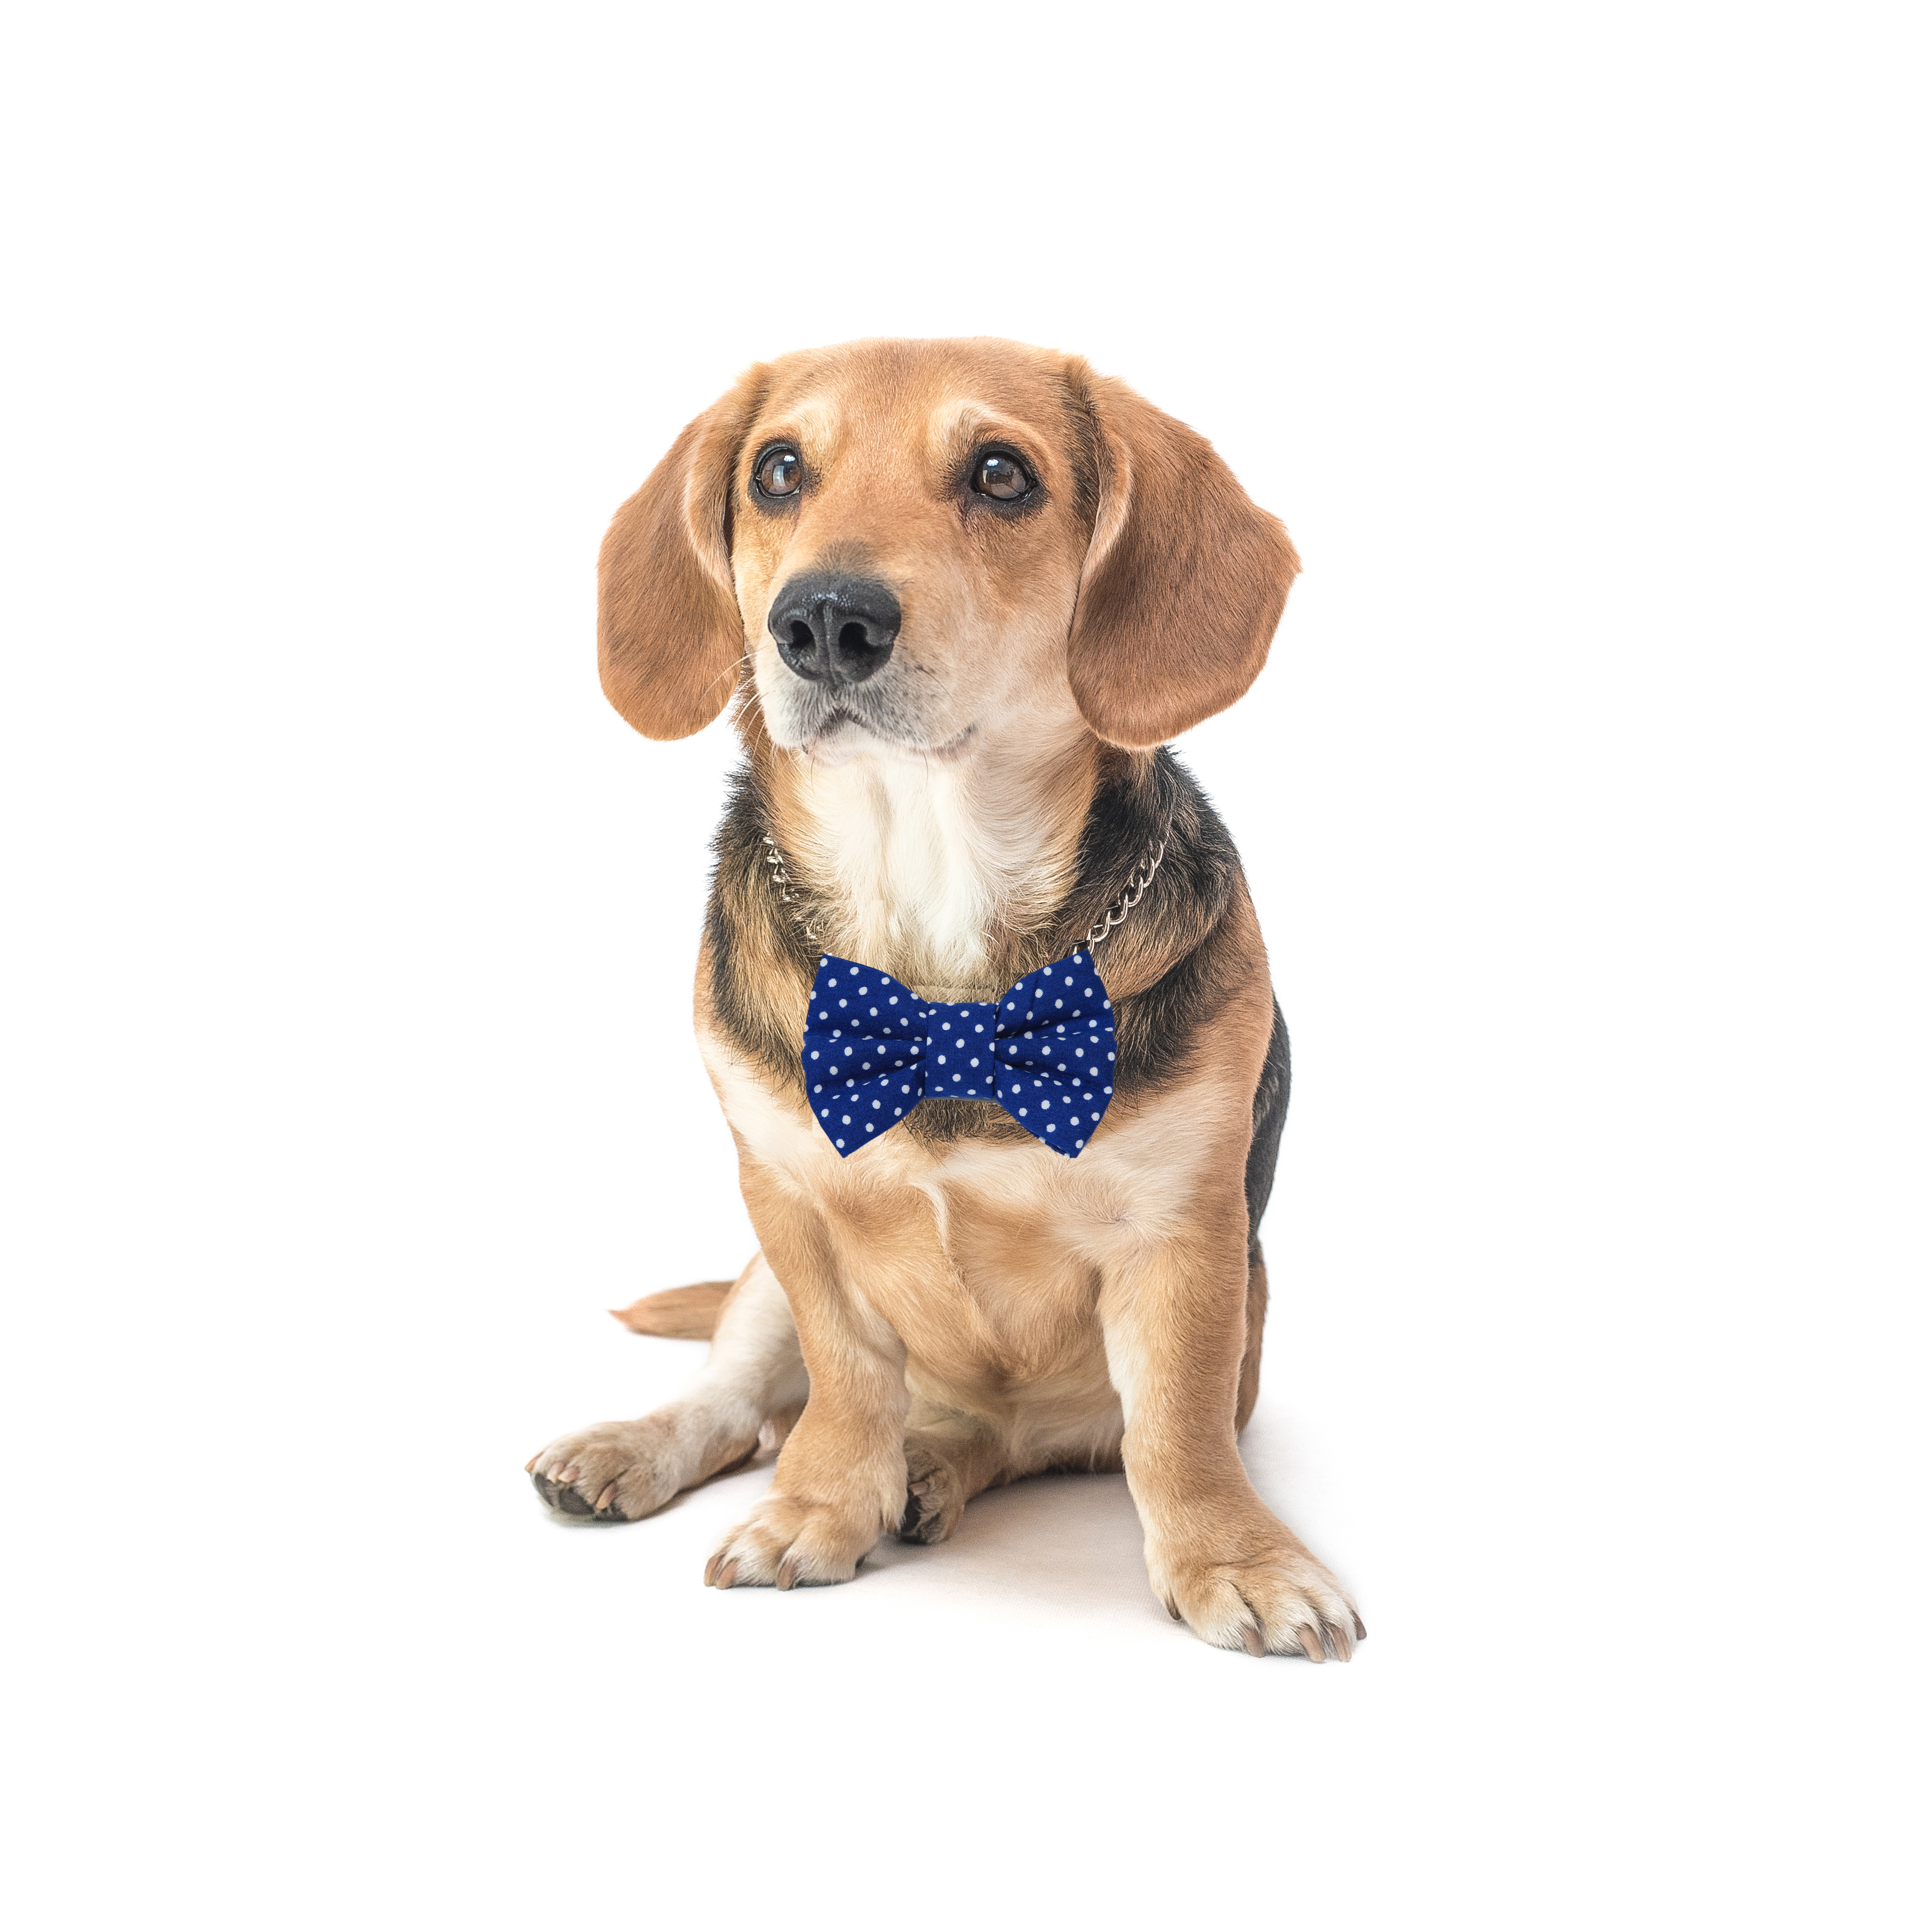 Blue dog bow tie with white dots